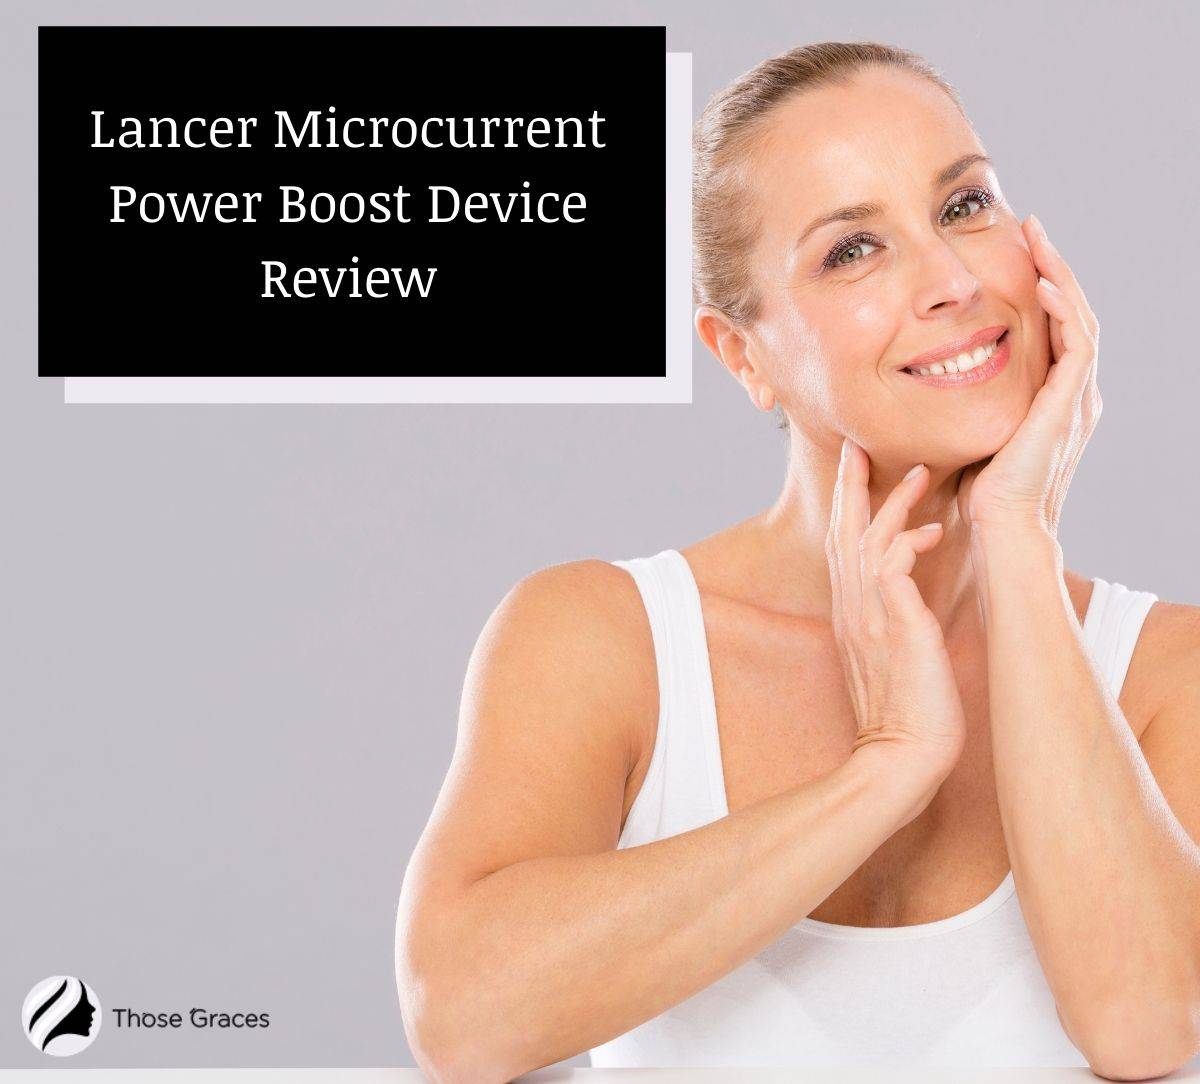 woman with radiant skin after using Lancer microcurrent power boost device